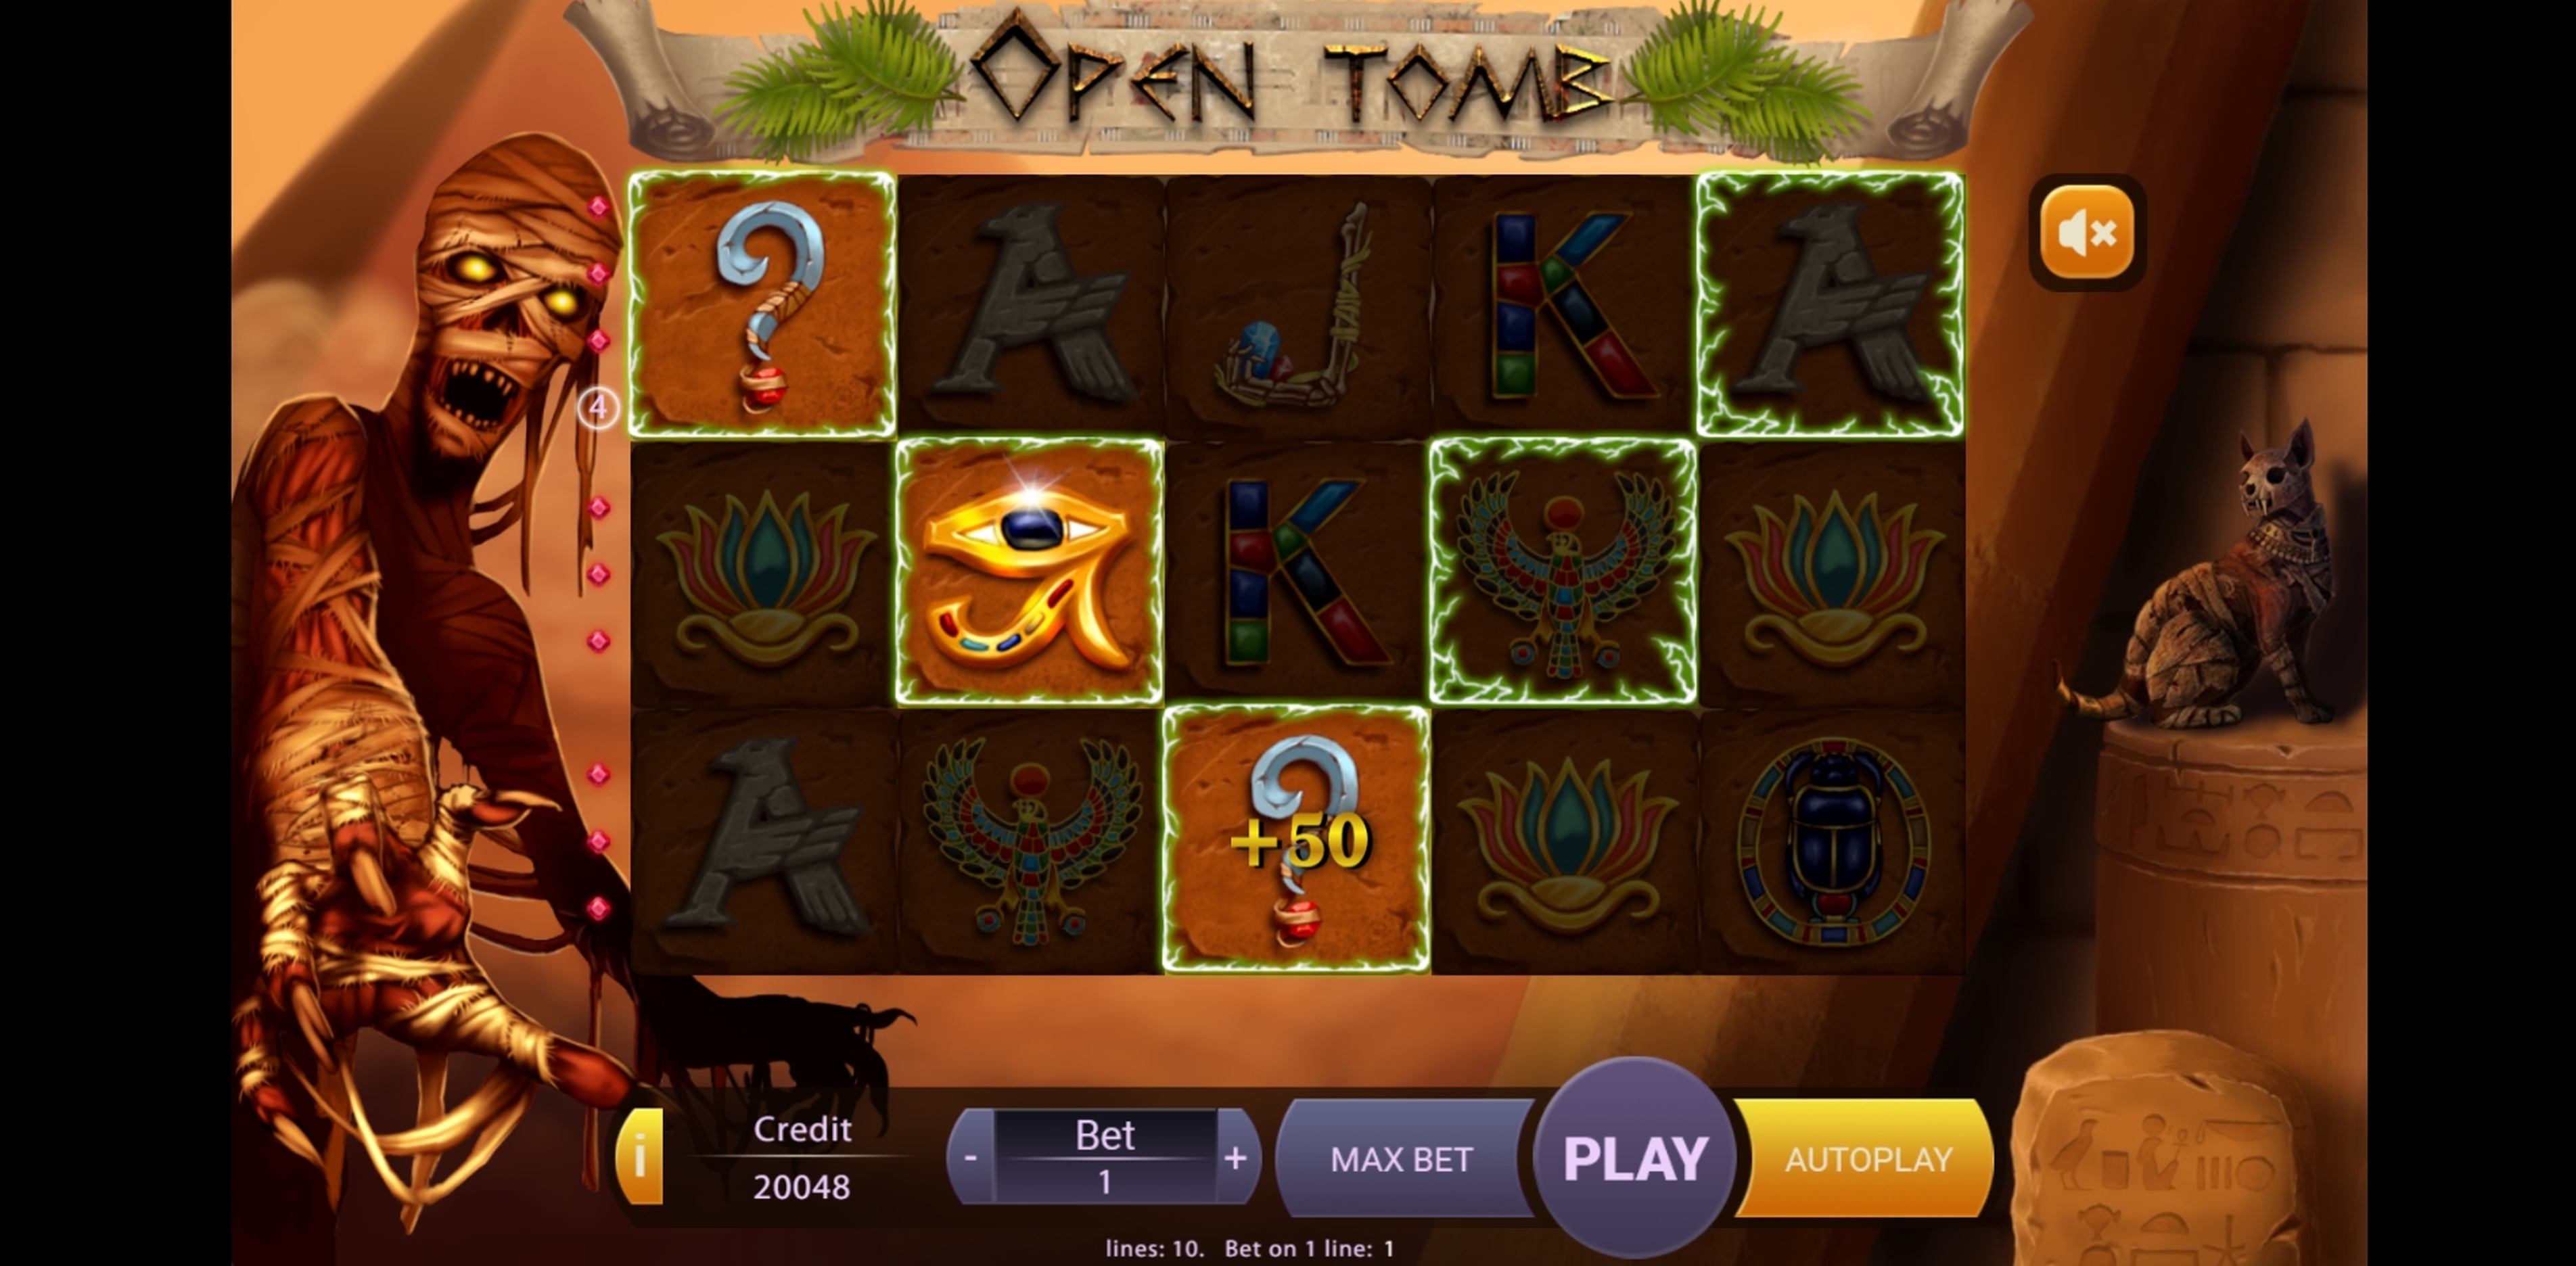 Win Money in Open Tomb Free Slot Game by X Play